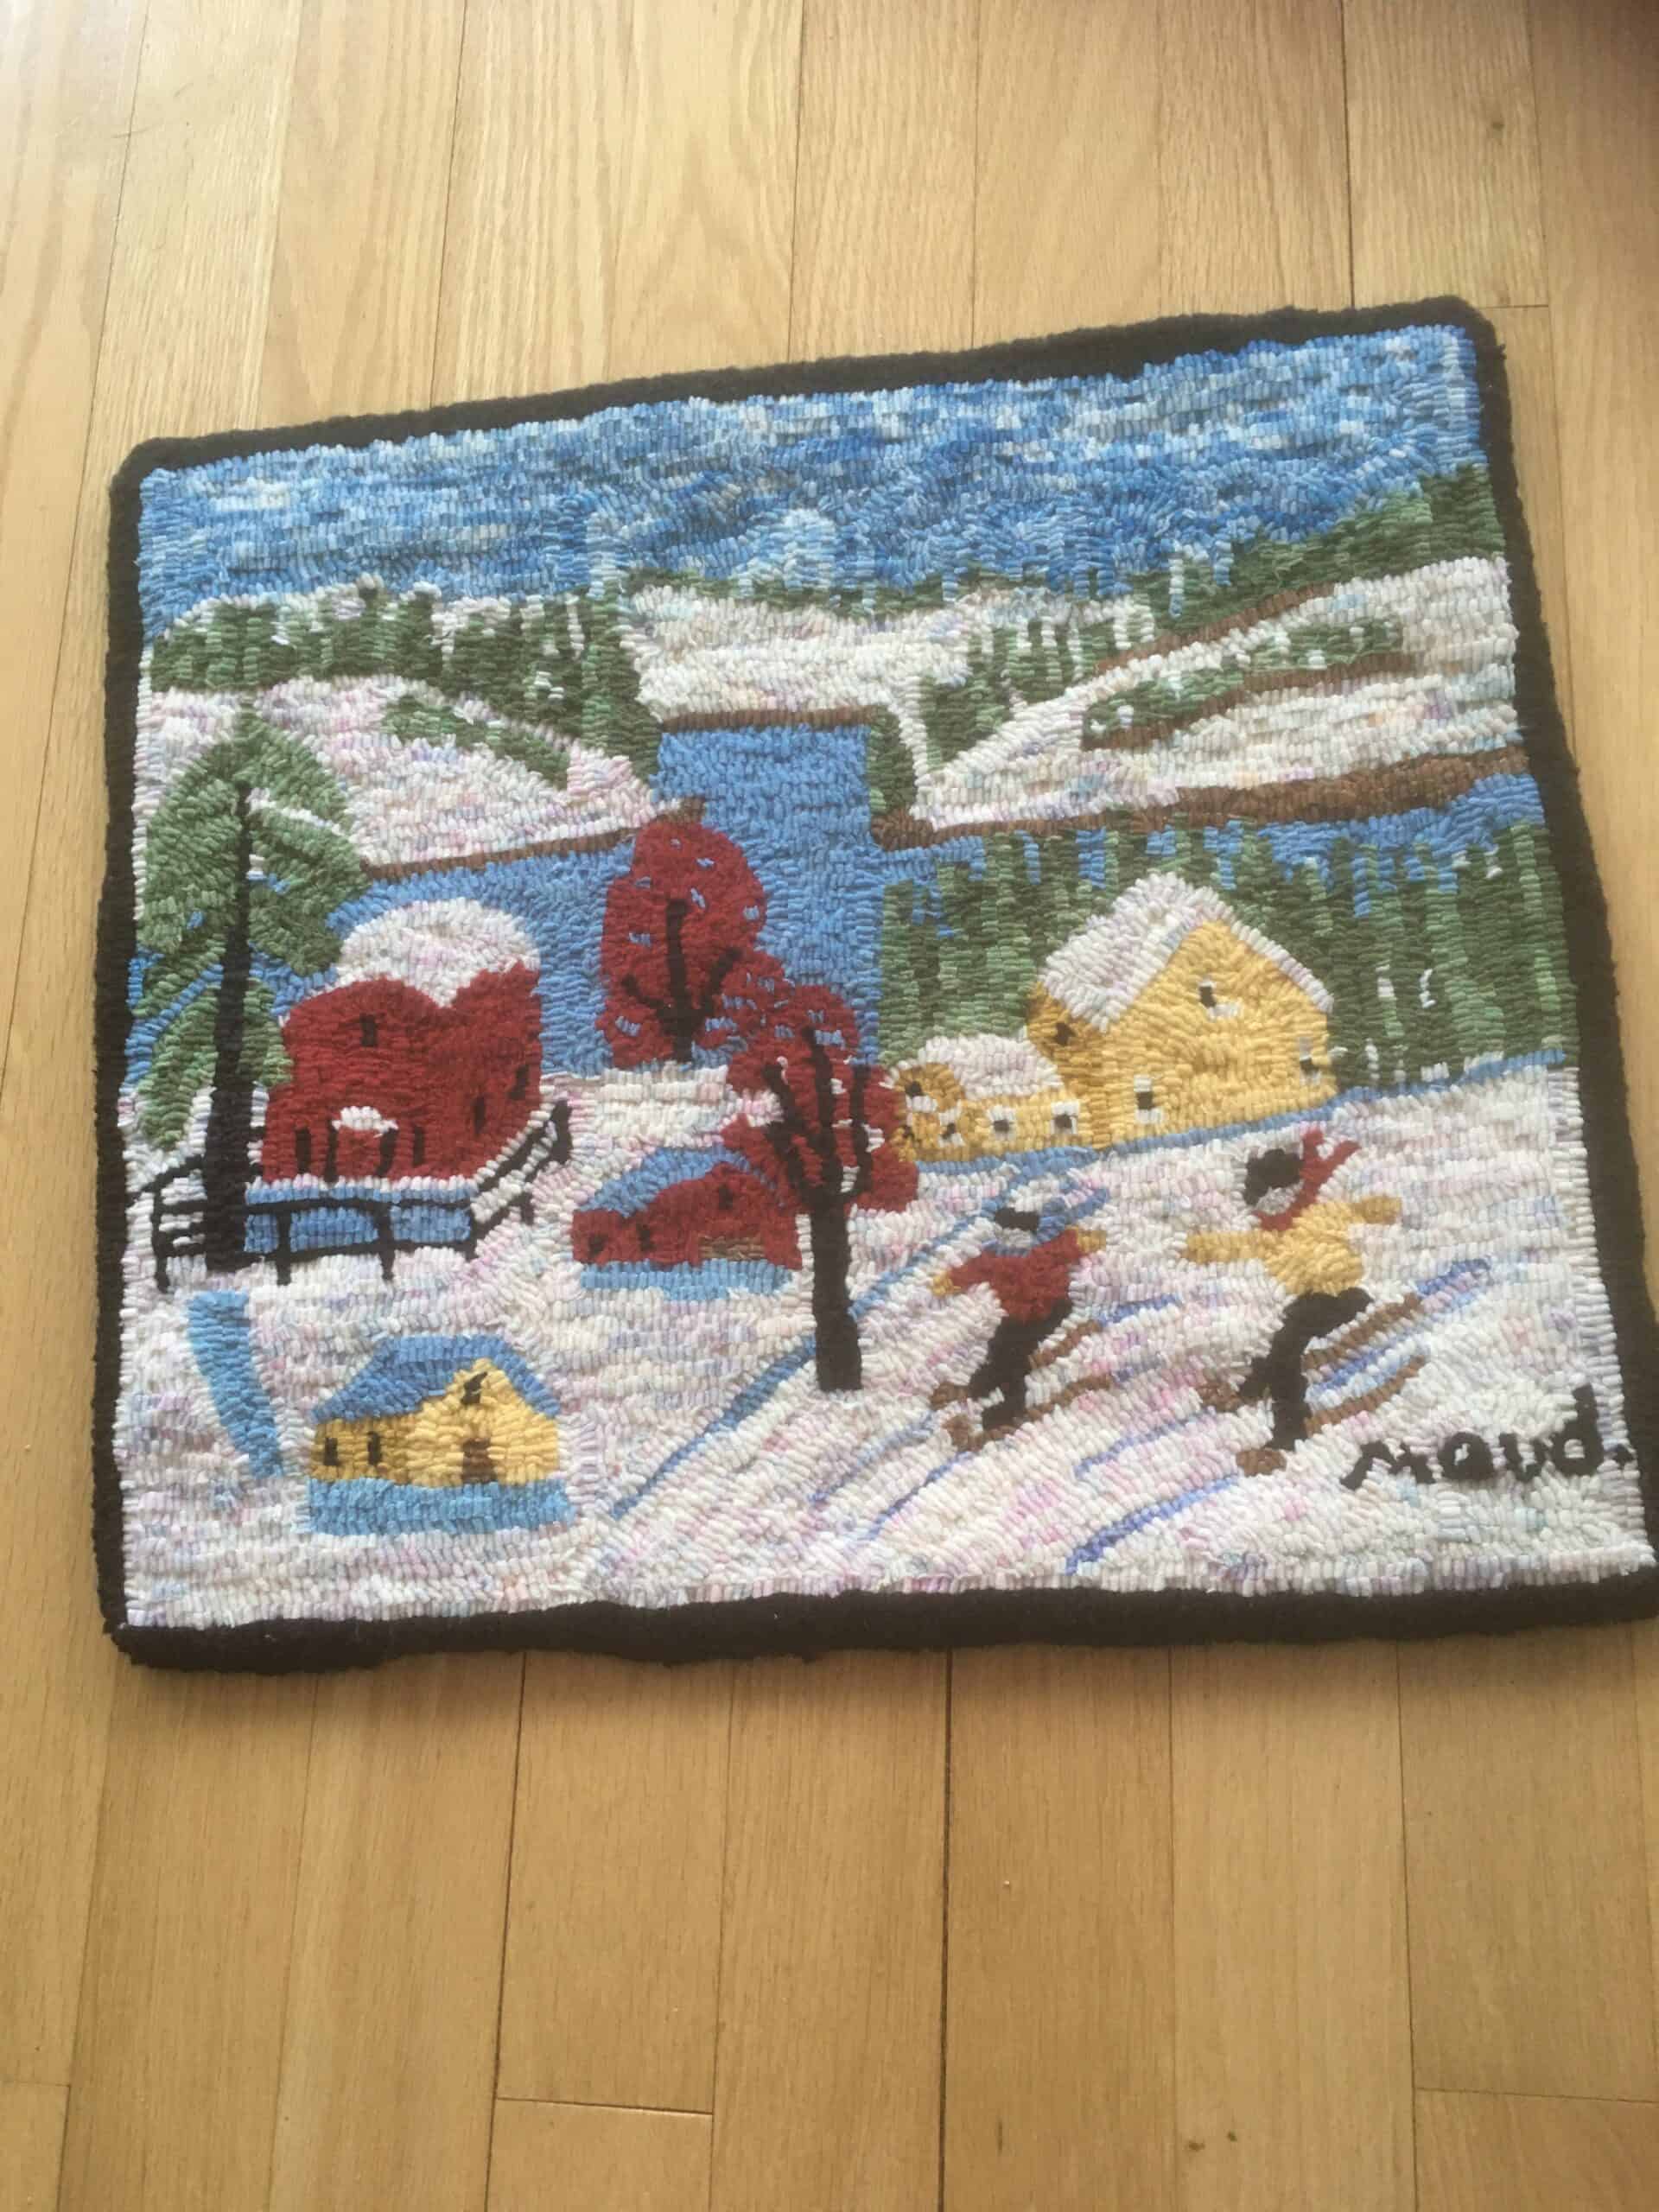 A Maud Lewis pattern by Highland Heart Hookery, hooked and photographed by <strong>Cathy Smith</strong>, Chamcook NB, completed in 2021, 16" x 18"